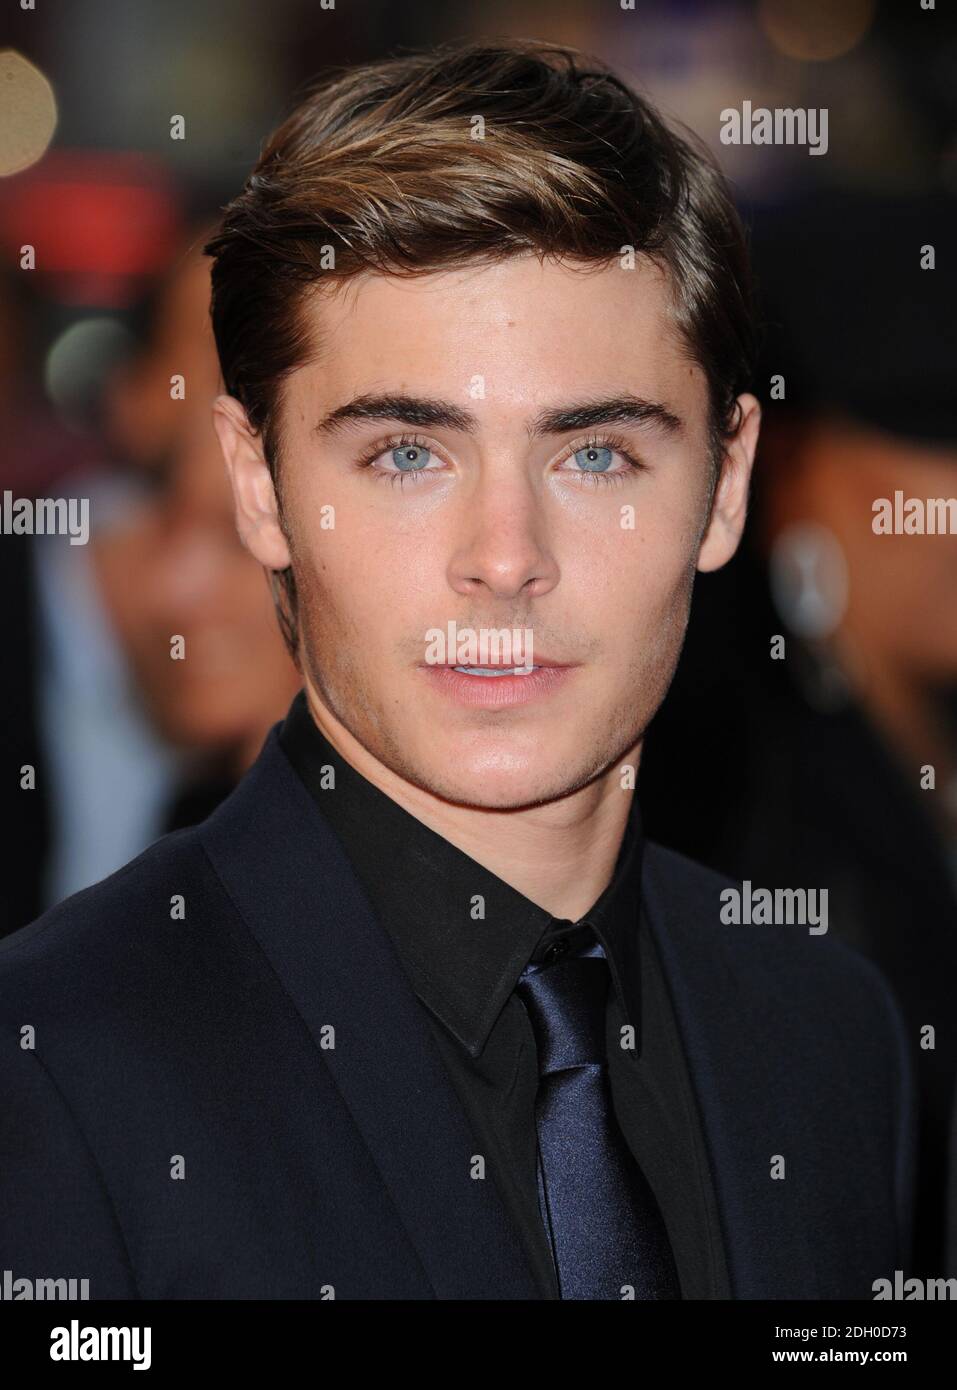 Zac Efron attends the UK premiere of 'High School Musical 3' at the Empire cinema, Leicester Square, in London. Stock Photo